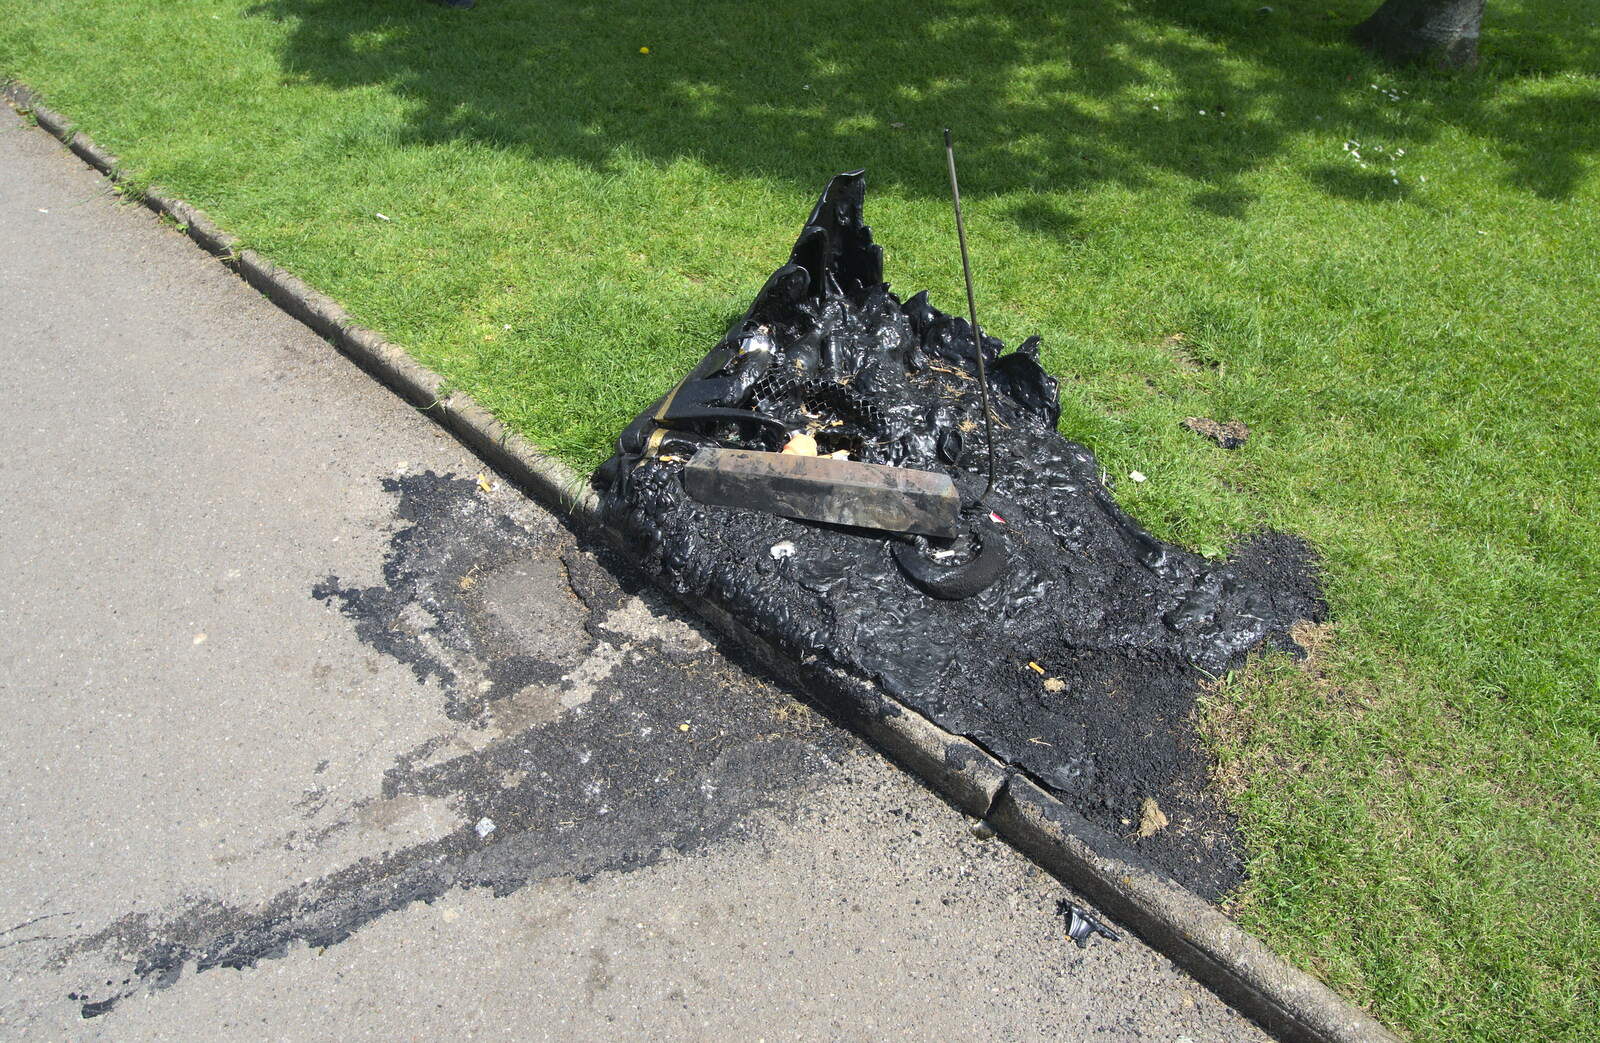 Some knobwit has torched a dustbin from A Tamar River Trip, Plymouth, Devon - 30th May 2016